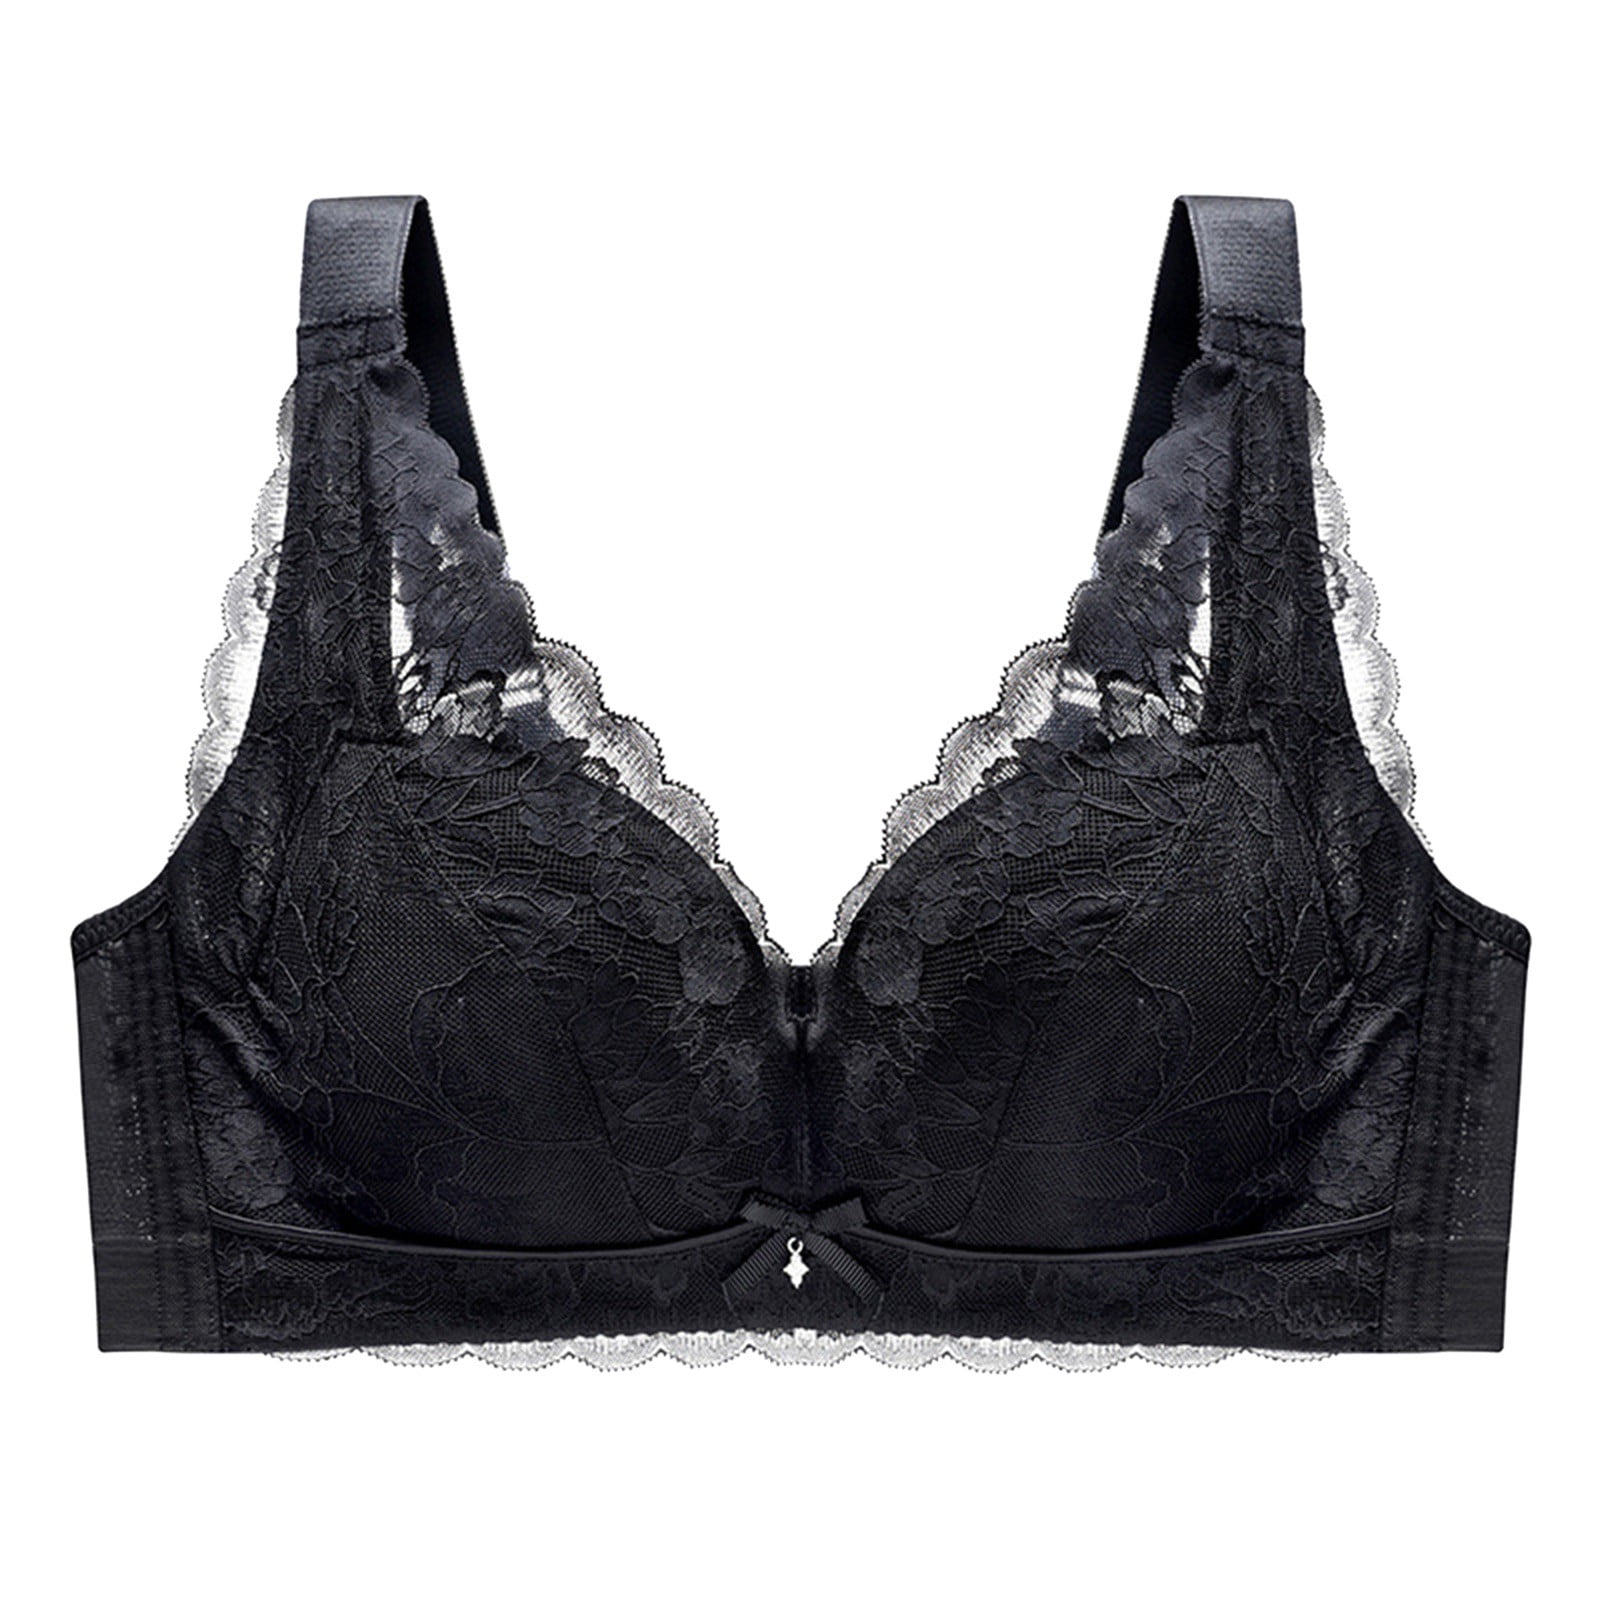 Compre Plus Size Sexy Lace Women's Bra sem roupa interior underwire  Lingerie Brassiere BH Backless Large Size Bralette